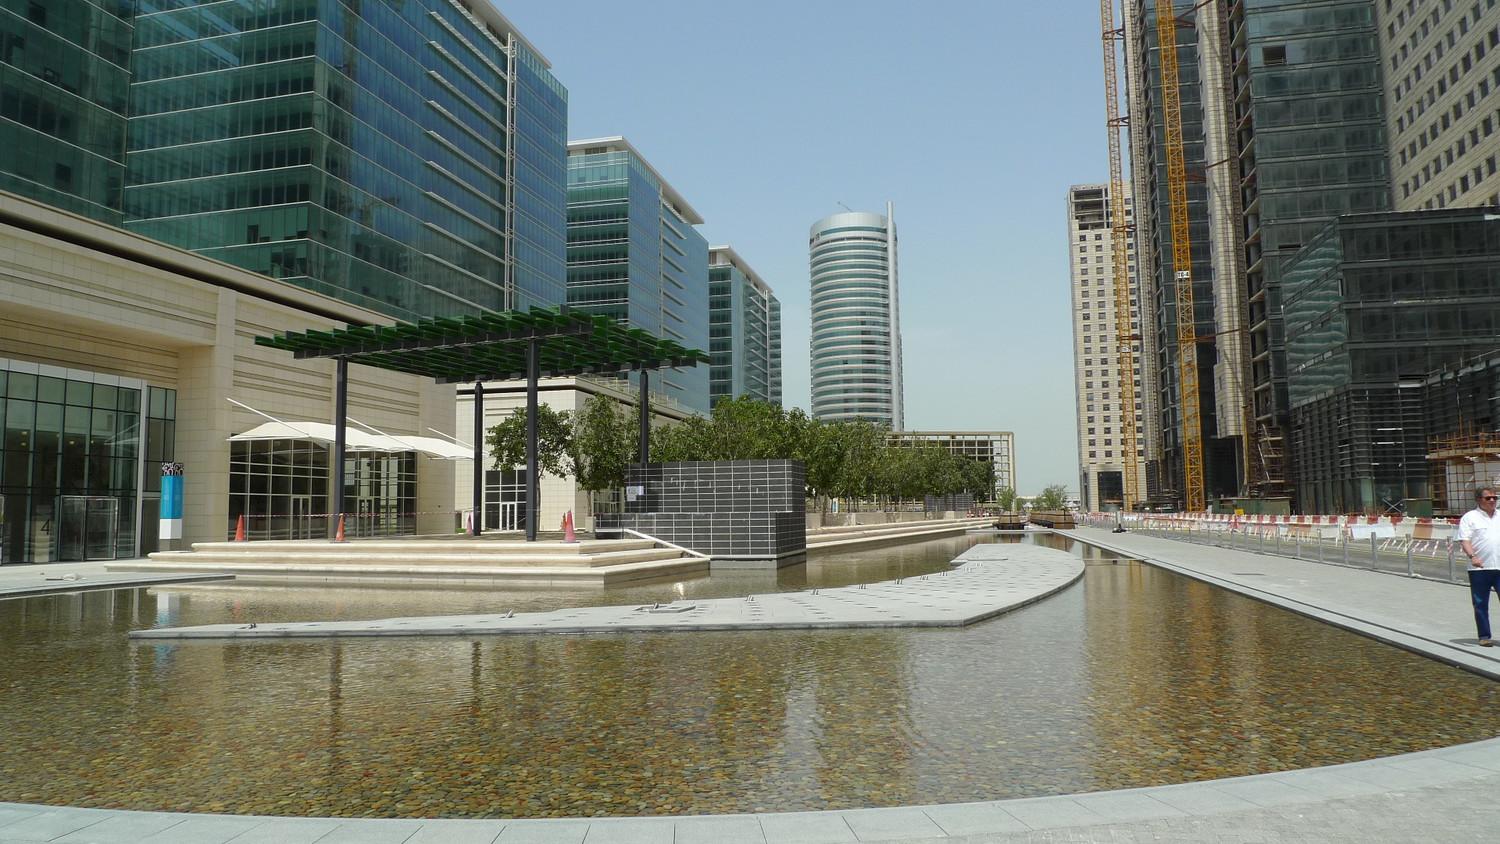 Office buildings and plaza